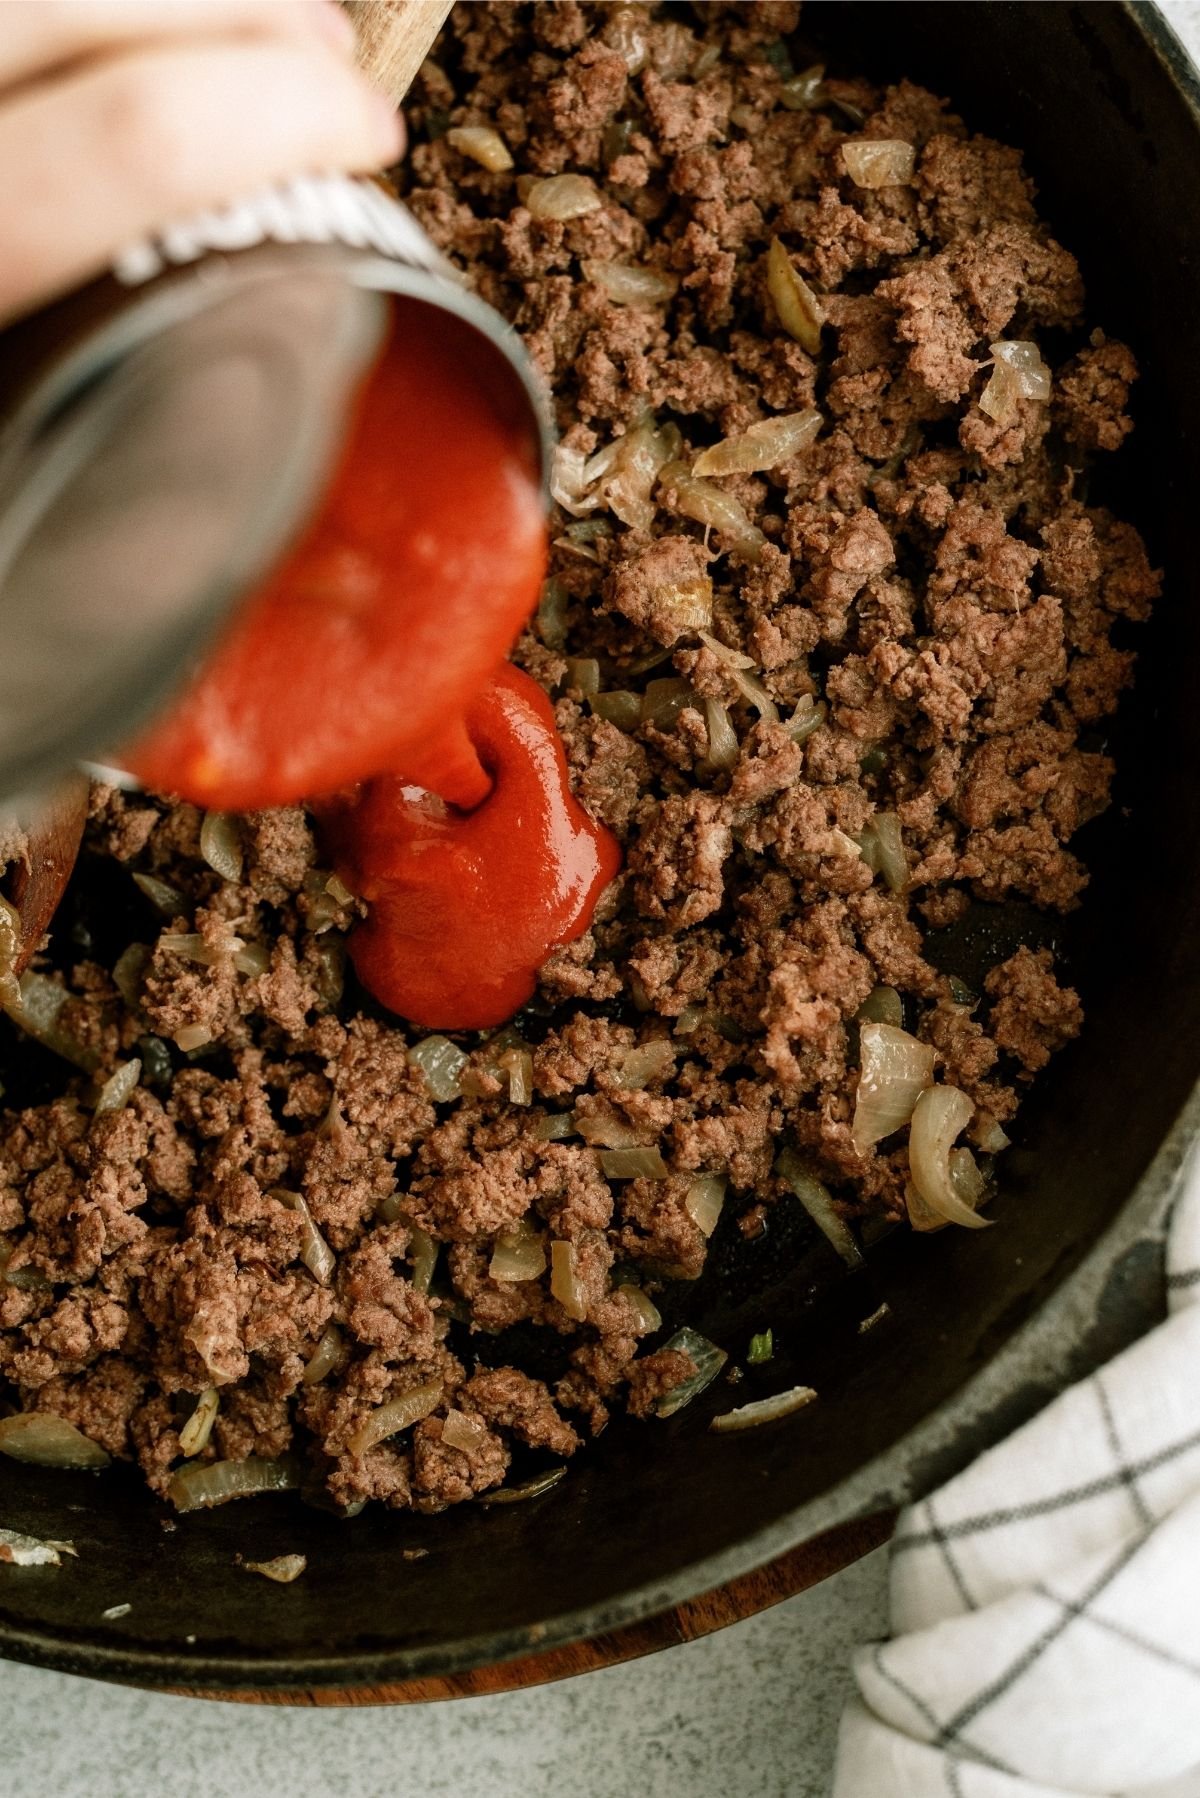 Pouring Manwich sauce over cooked ground beef mixture